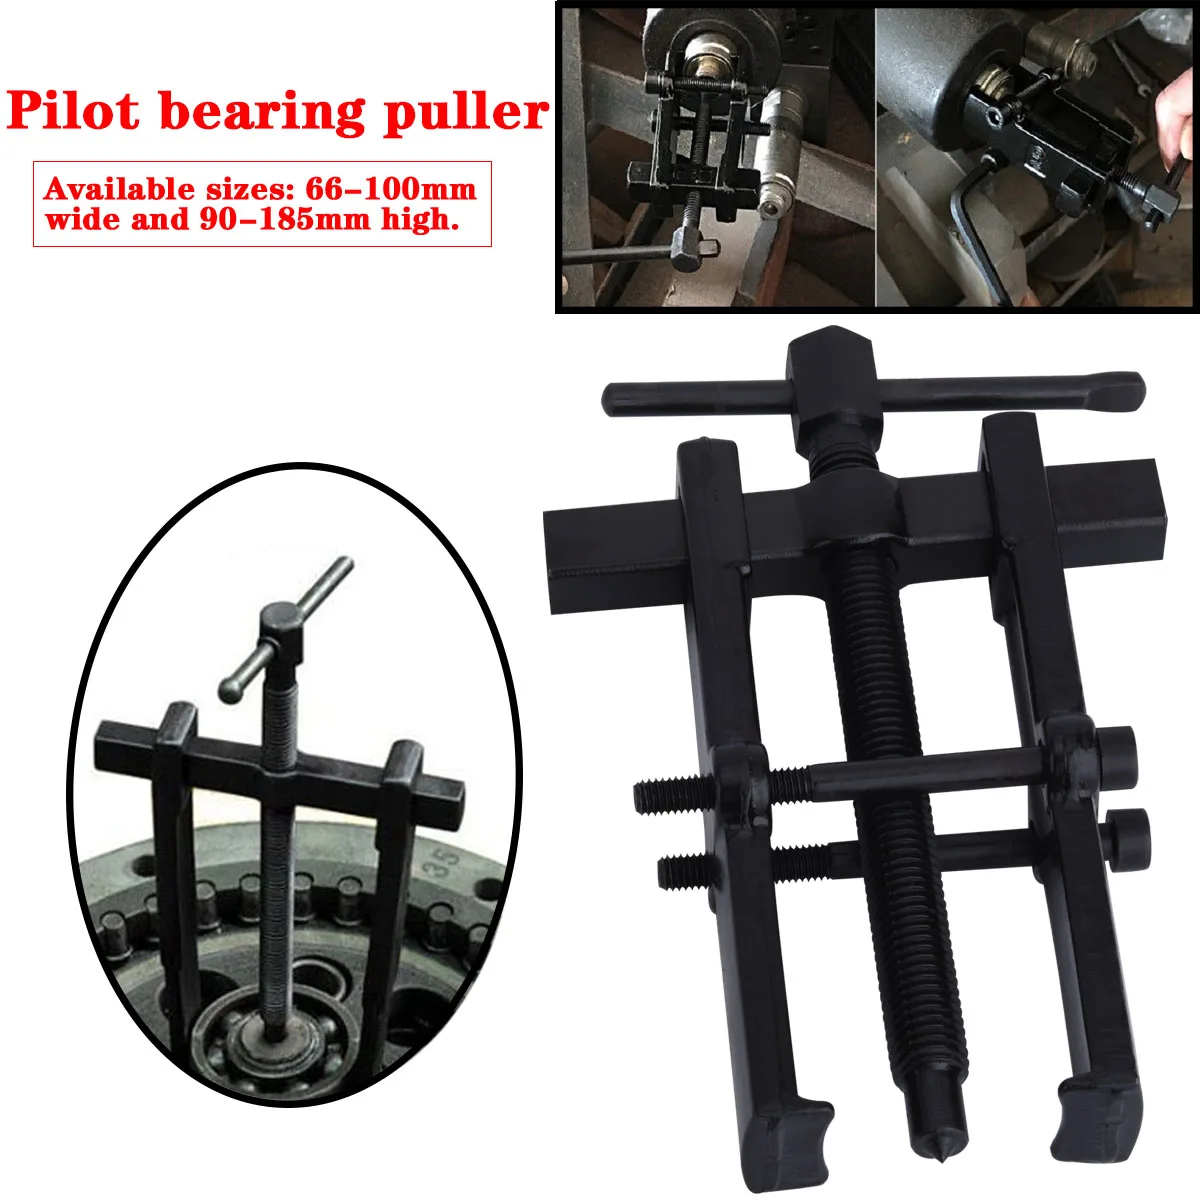 Cocoarm Bearing Puller Bearing Puller Bottom Bracket Puller Two Jaw Pilot Bearing Puller Carbon Steel Adjustable Pulley Remover Remover Tool Kit 35 * 45 2.5 Inch 